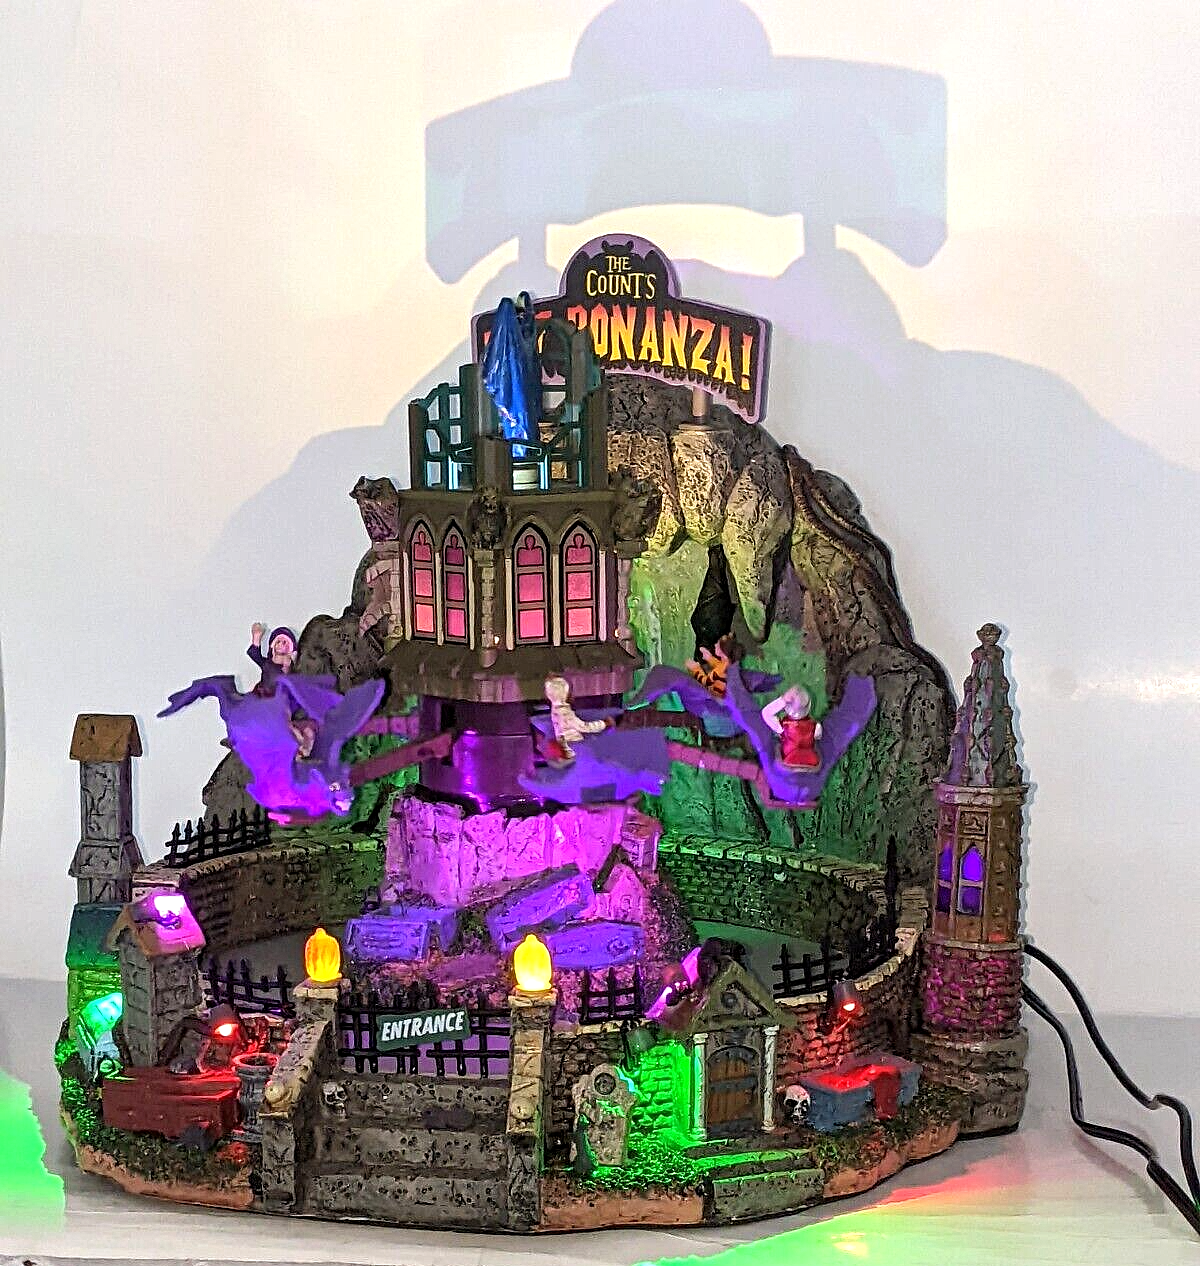 Lemax The Counts Bat Bonanza Spooky Halloween Lighted Decoration Eerie LED's NEW - $235.57